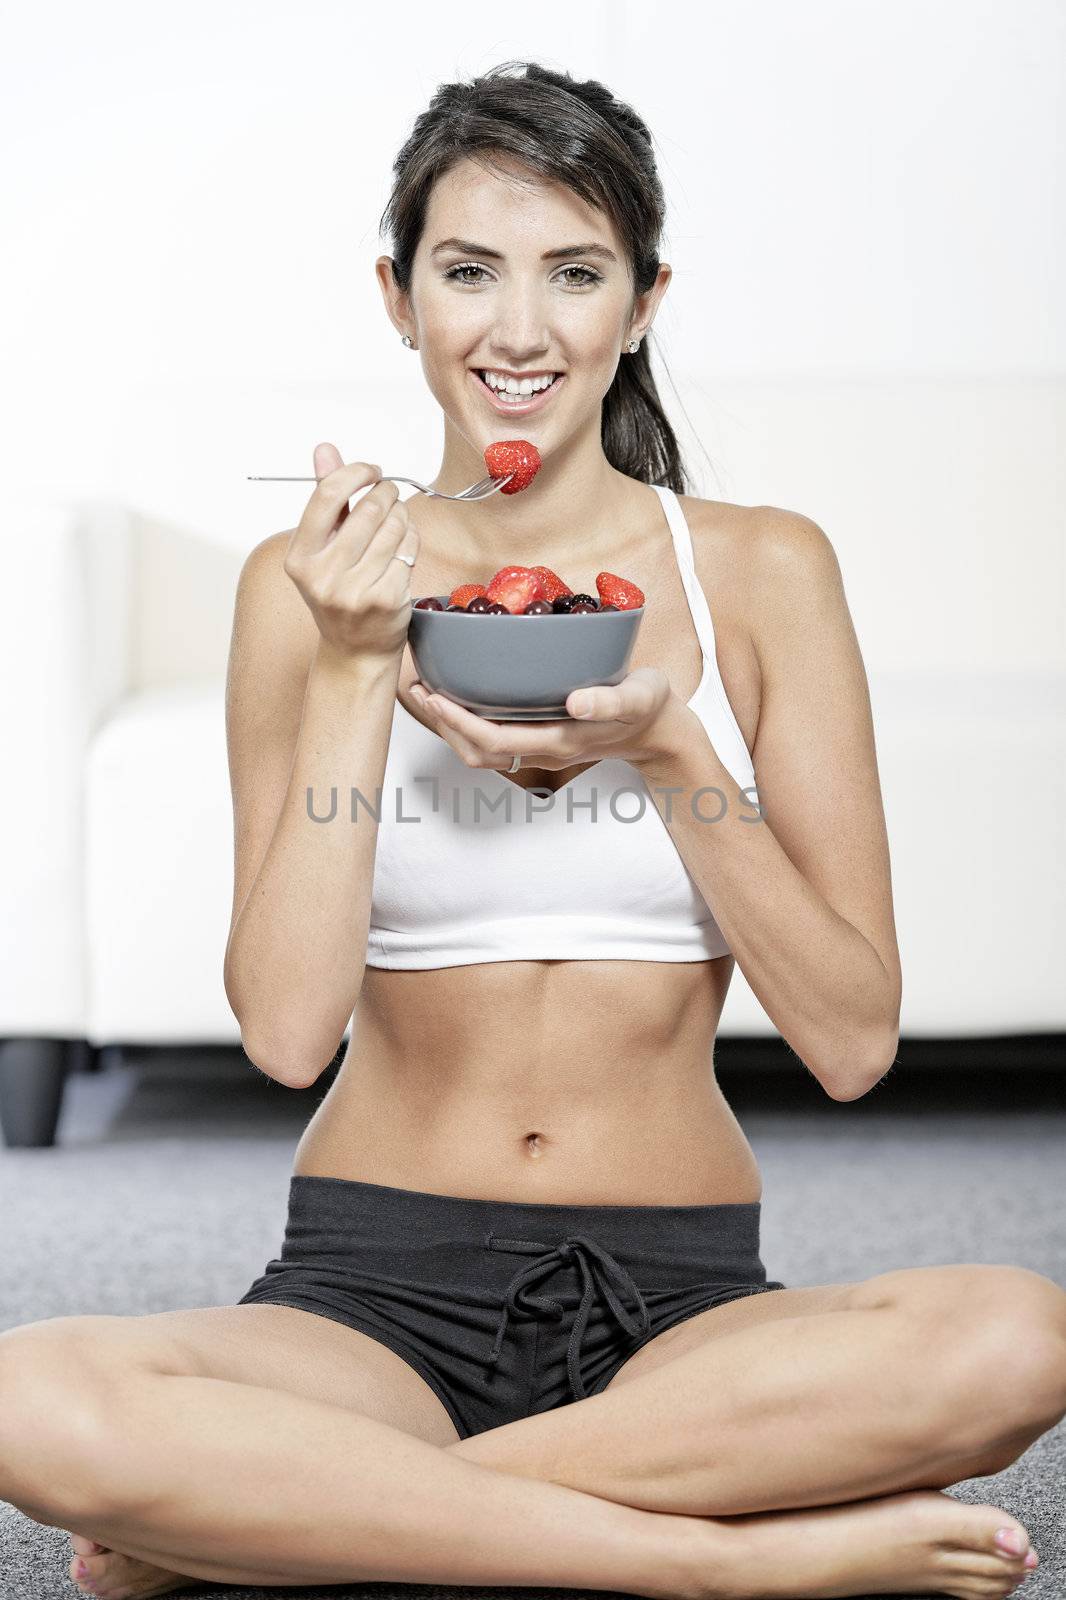 beautiful young woman in fitness clothes eating fresh fruit from a bowl at home